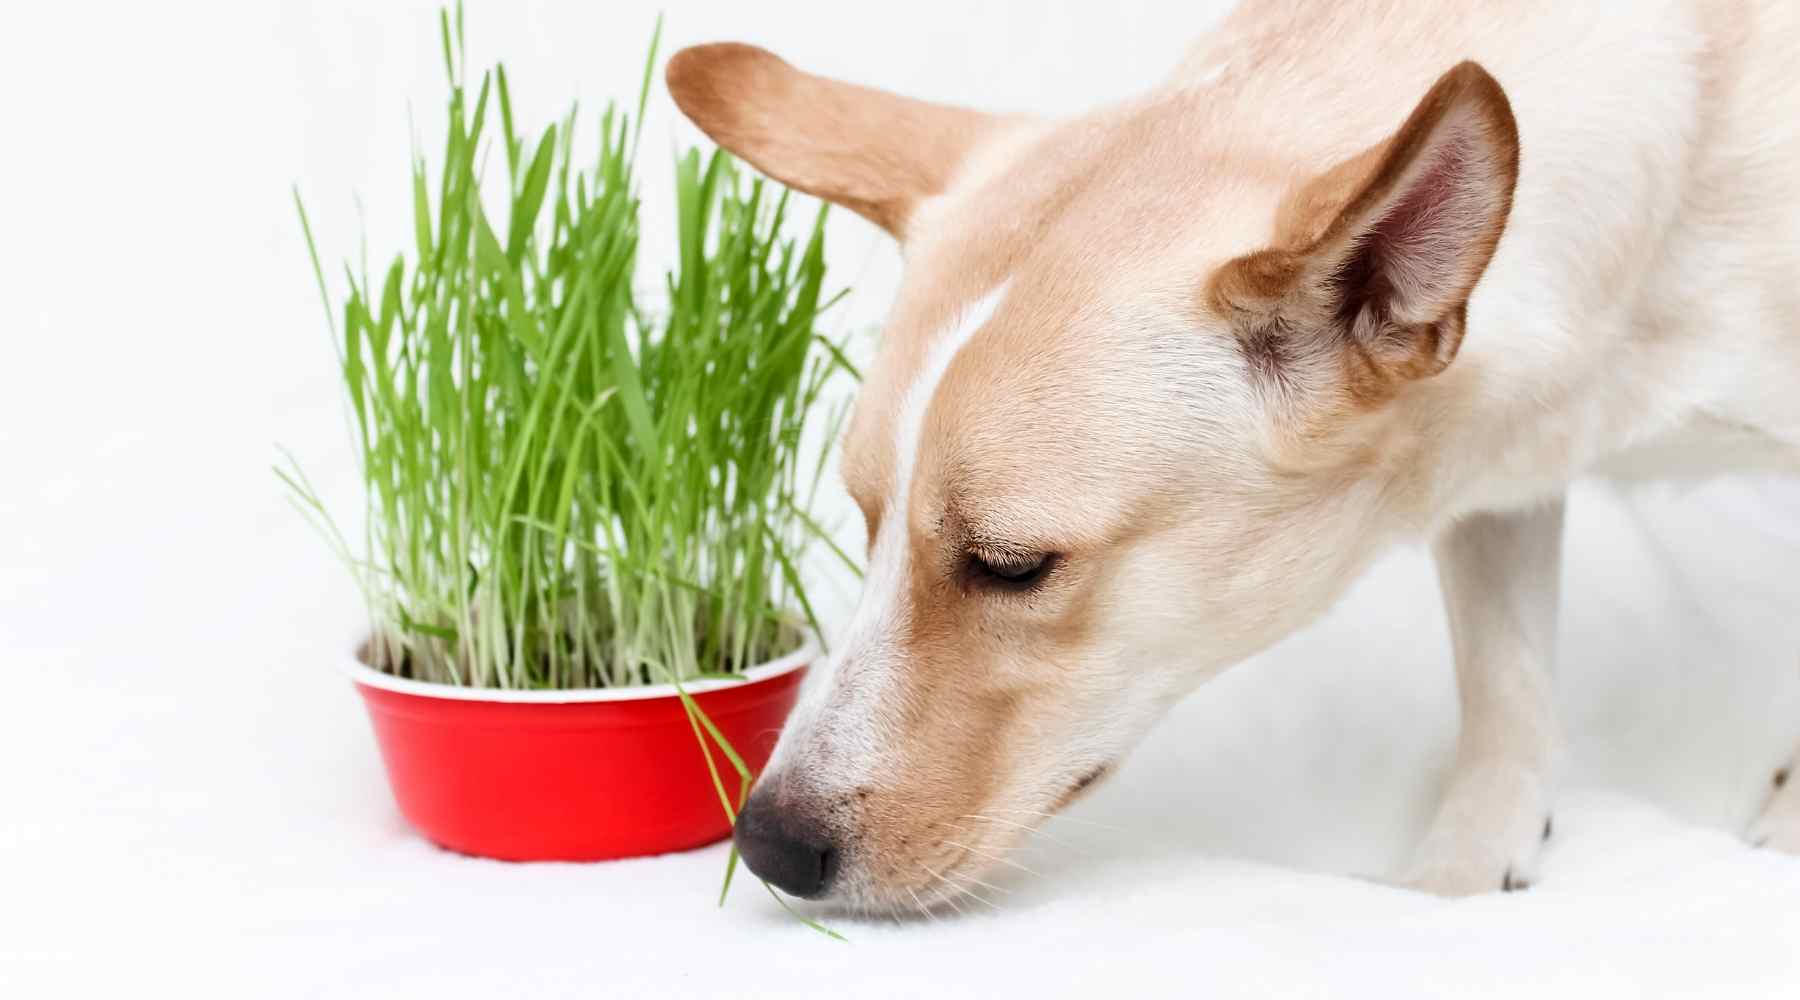 Dogs love eating grass